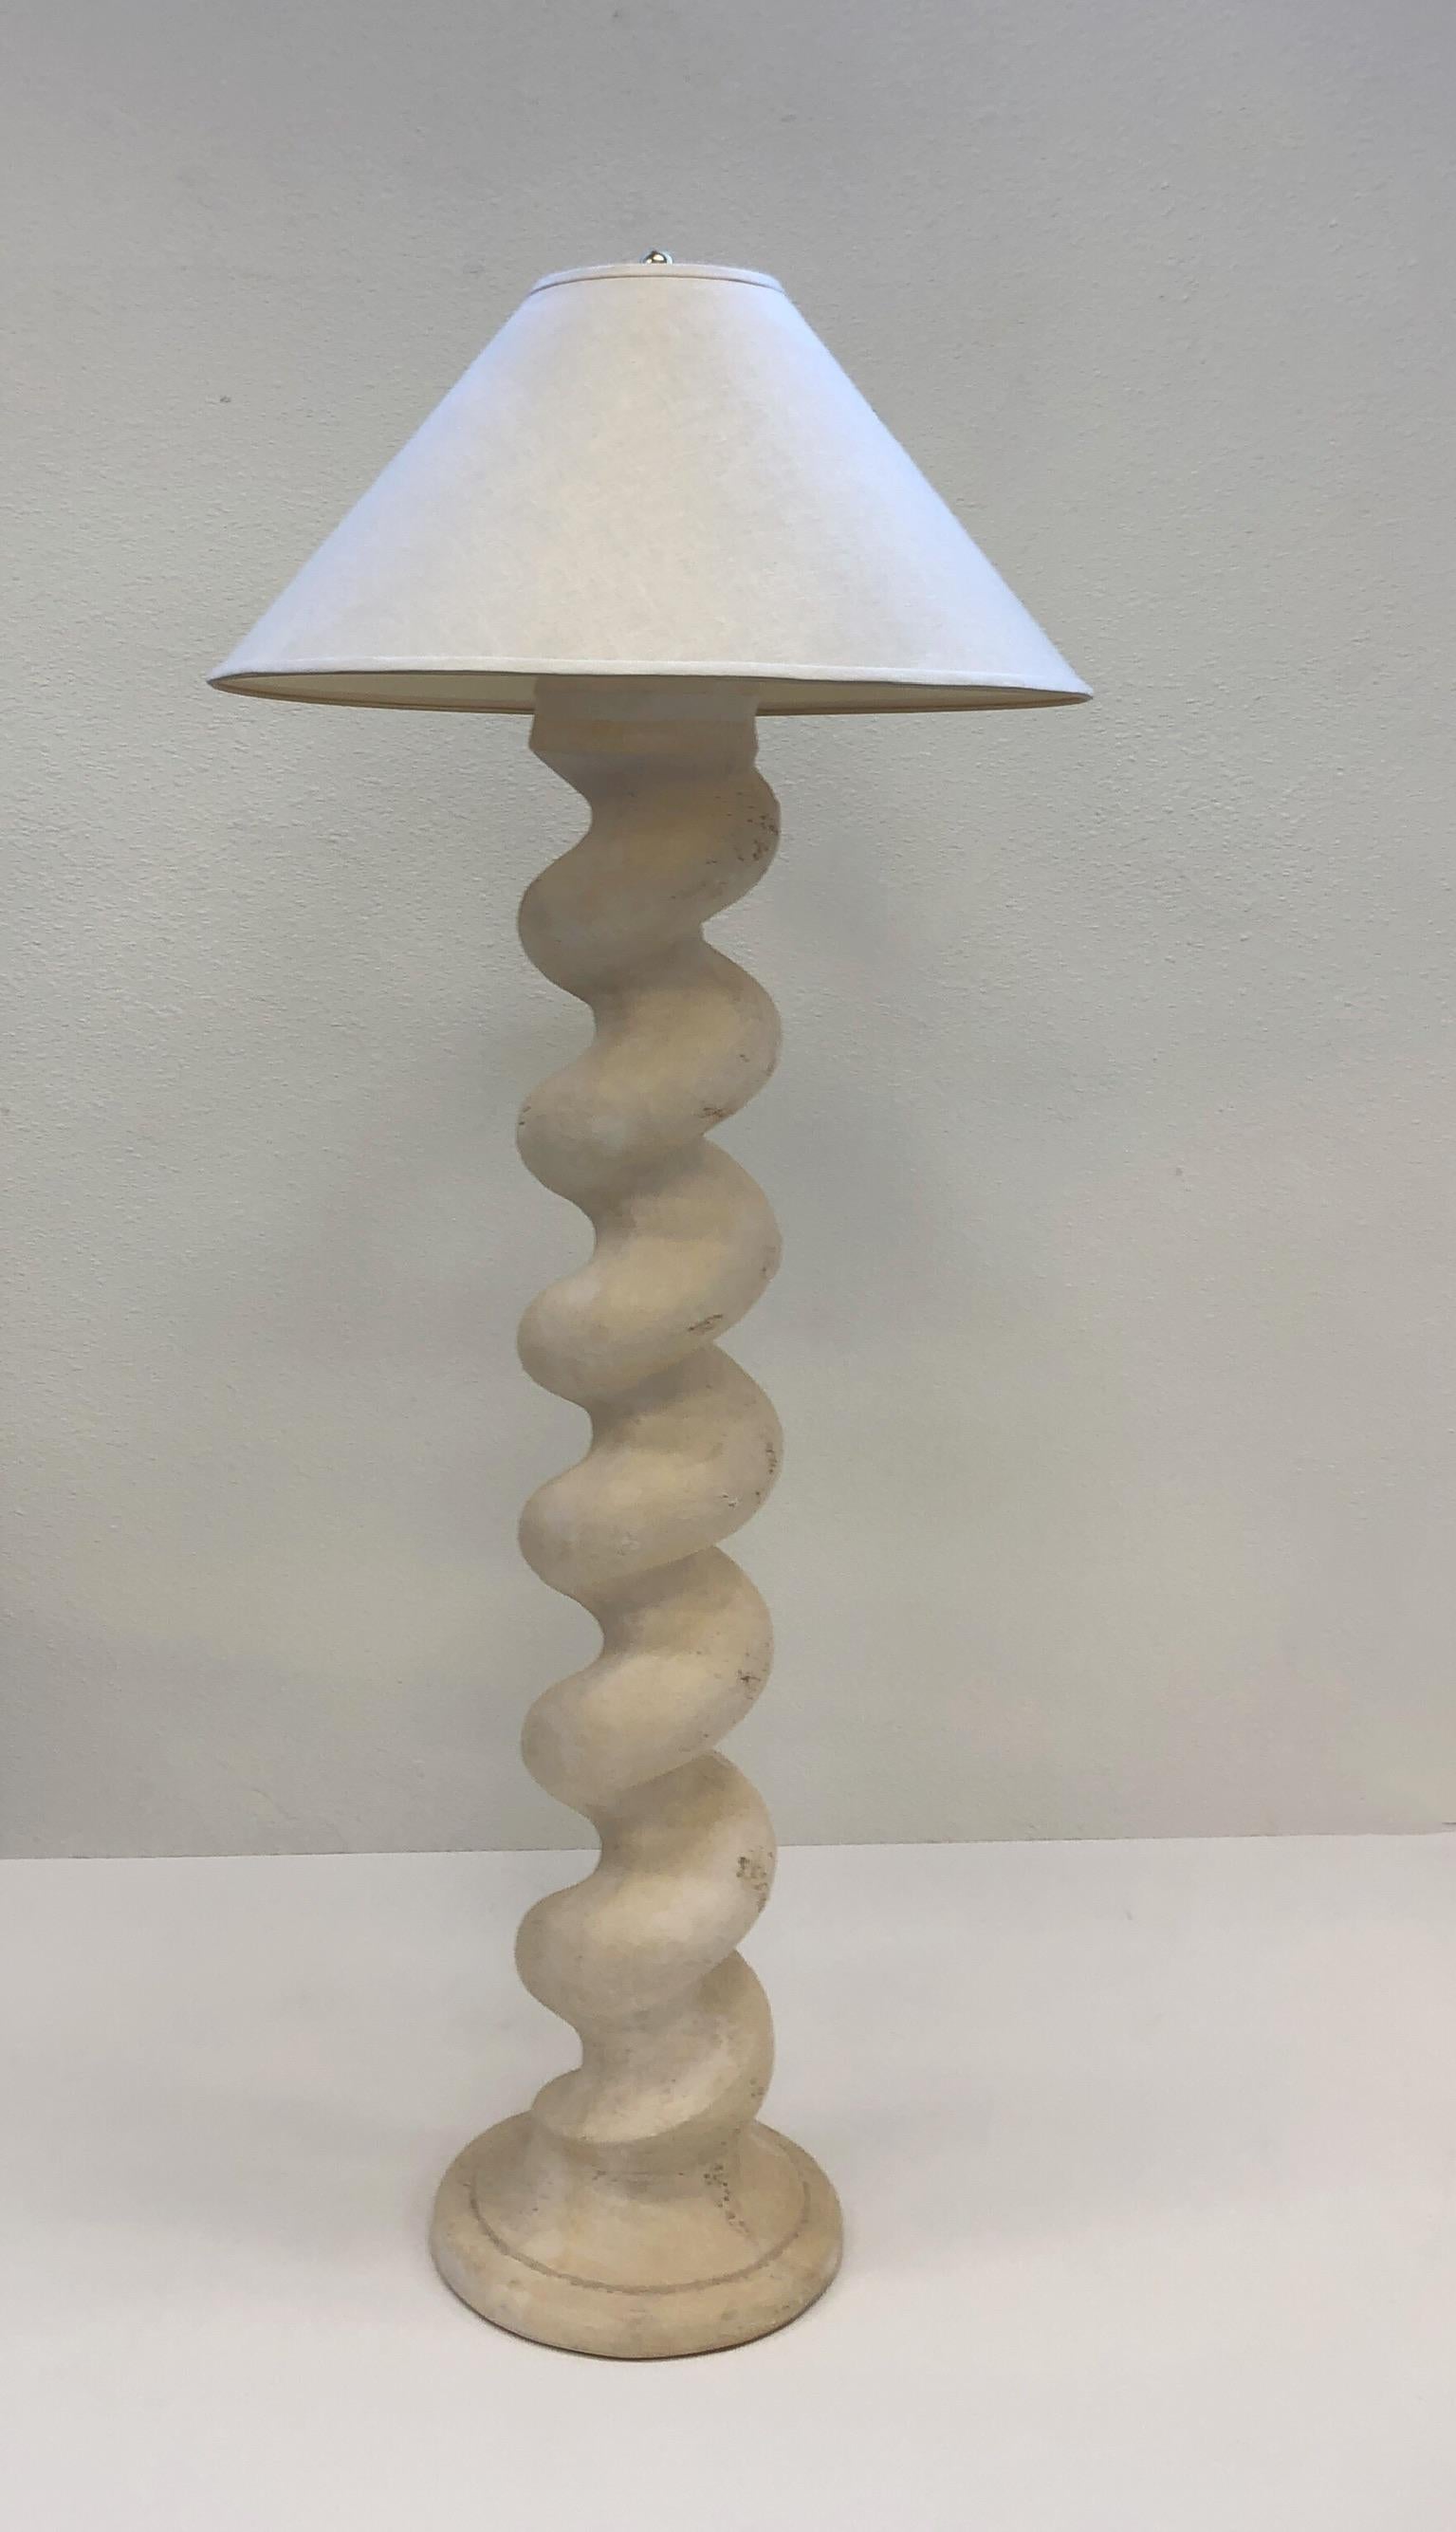 A beautiful architectural spiral column floor lamp designed by Michael Taylor in the 1970. The lamp is constructed of cast plaster and polish brass with original vanilla linen shade. 
Newly rewired. We also have the table lamp version of this in a